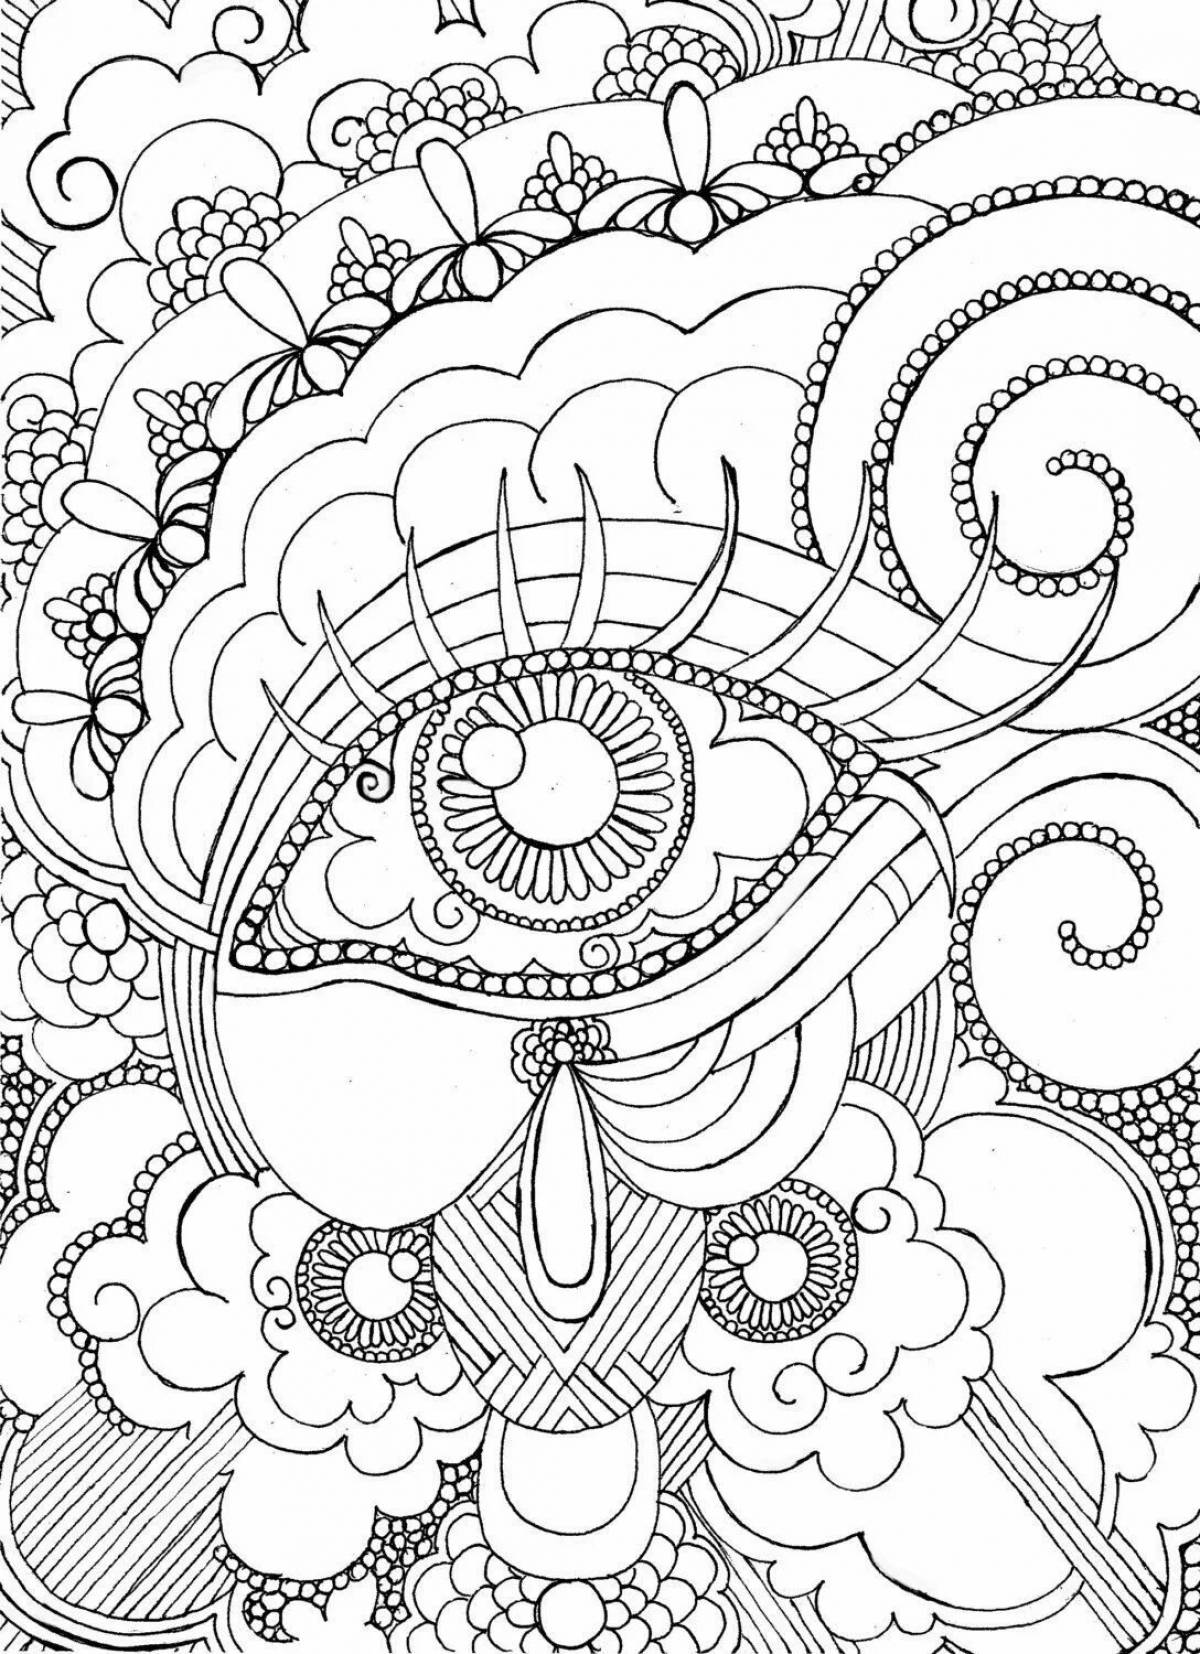 Delightful anti-stress coloring book for adults